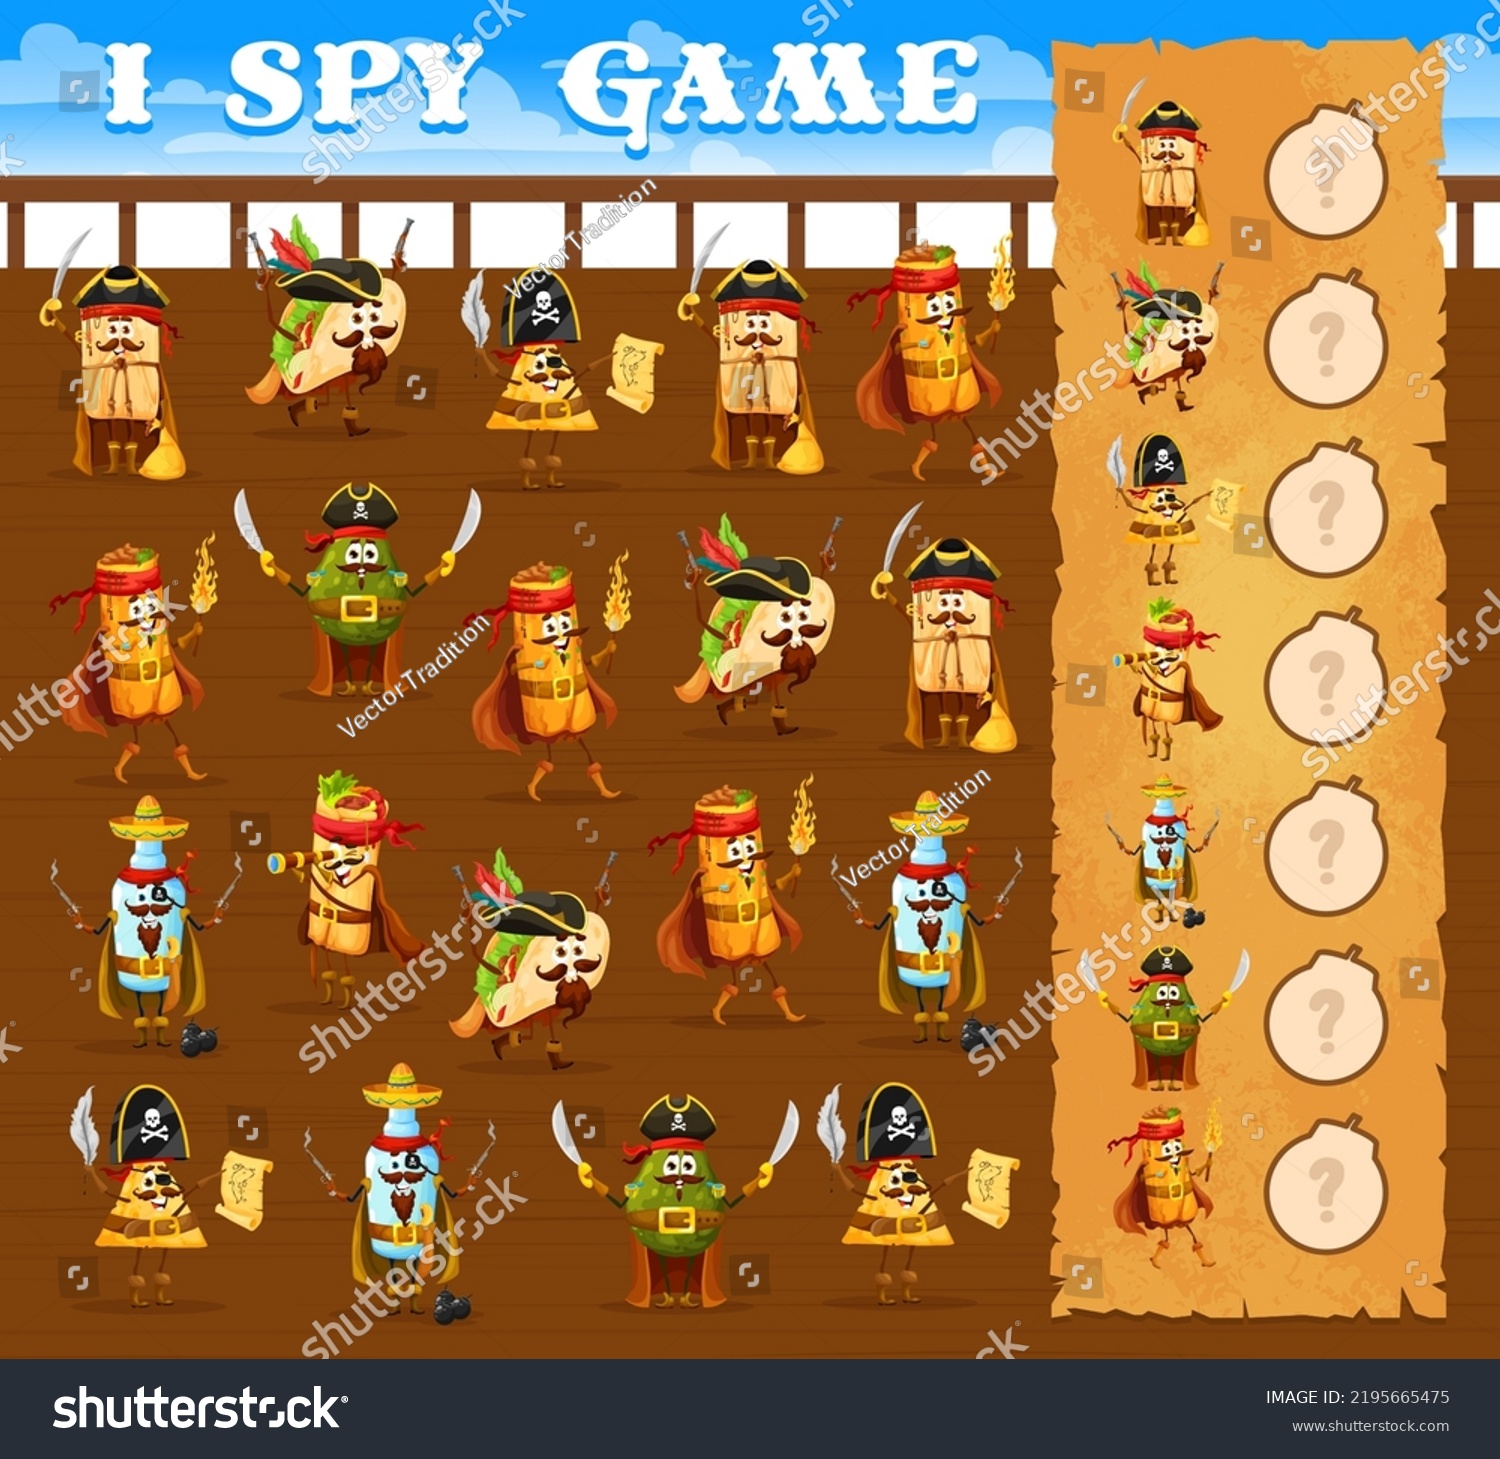 SVG of I spy game, cartoon mexican food pirate and corsair characters. Kids vector quiz worksheet puzzle with tex mex tamales, tacos, burrito and nachos, chimichanga, tequila and avocado personages svg